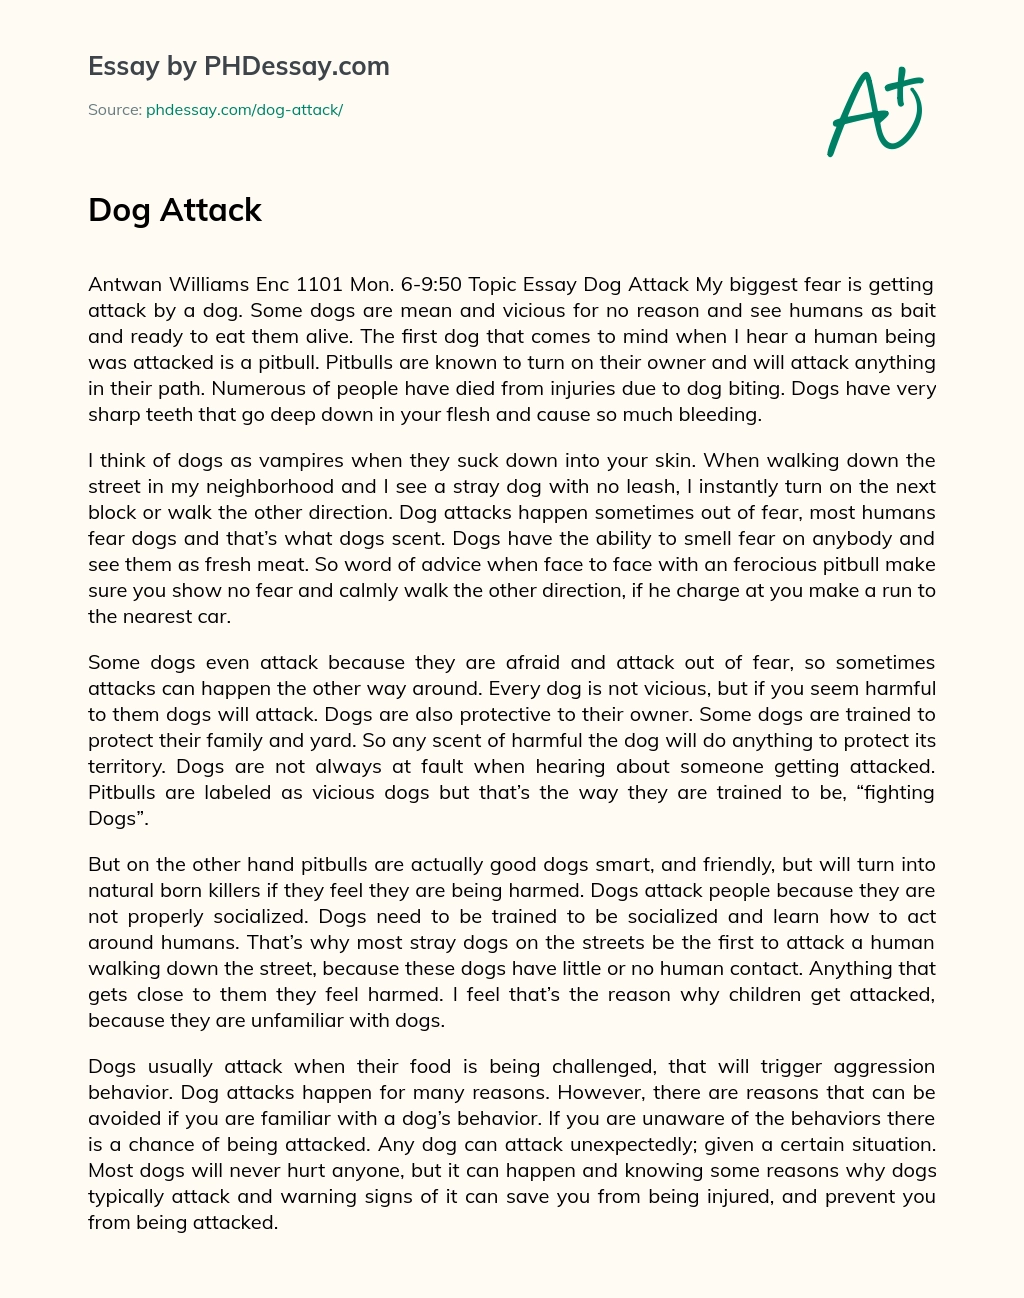 Fear of Dog Attacks and How to Avoid Them essay